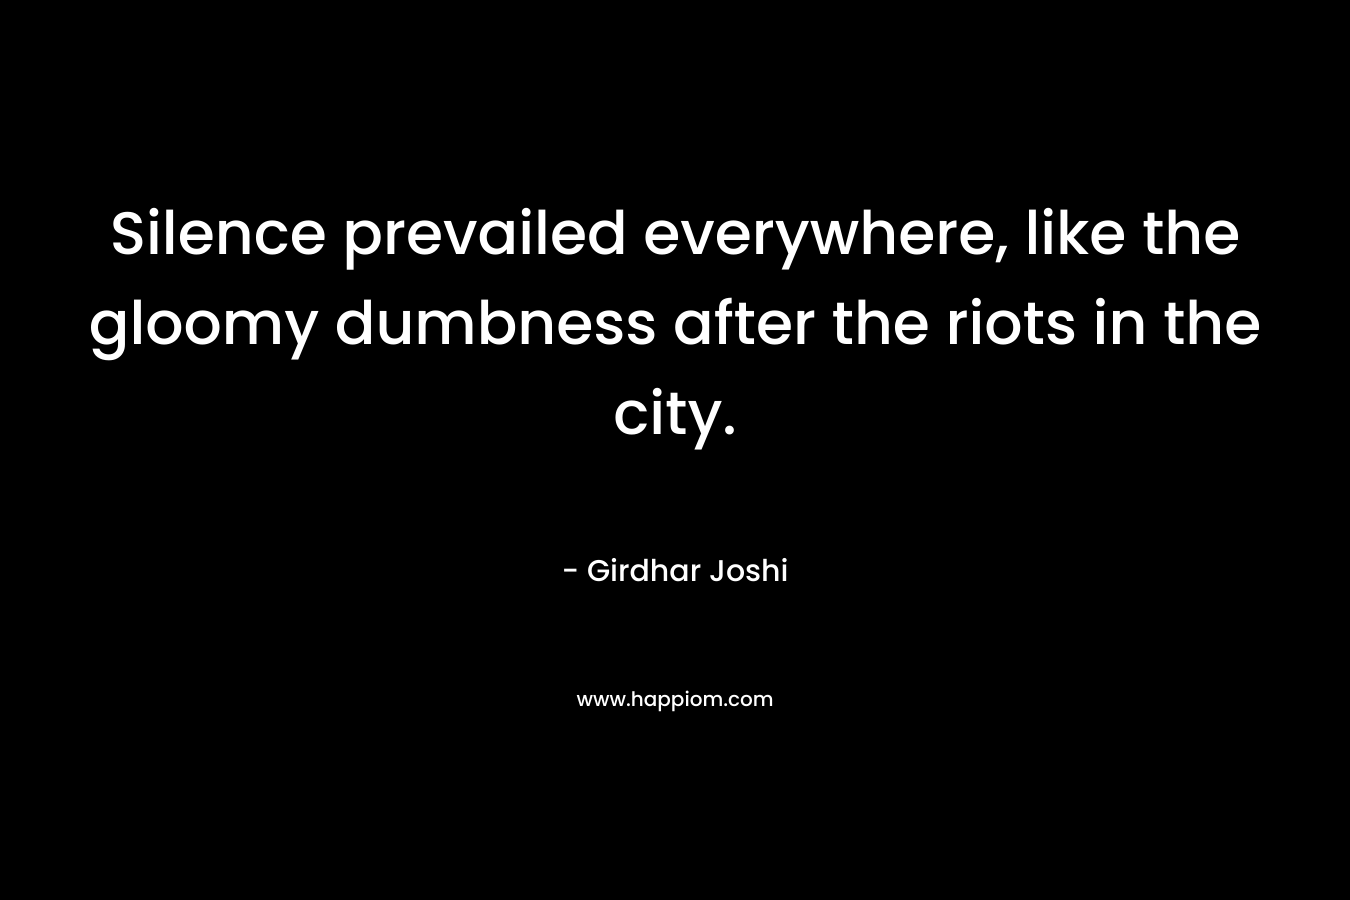 Silence prevailed everywhere, like the gloomy dumbness after the riots in the city. – Girdhar Joshi